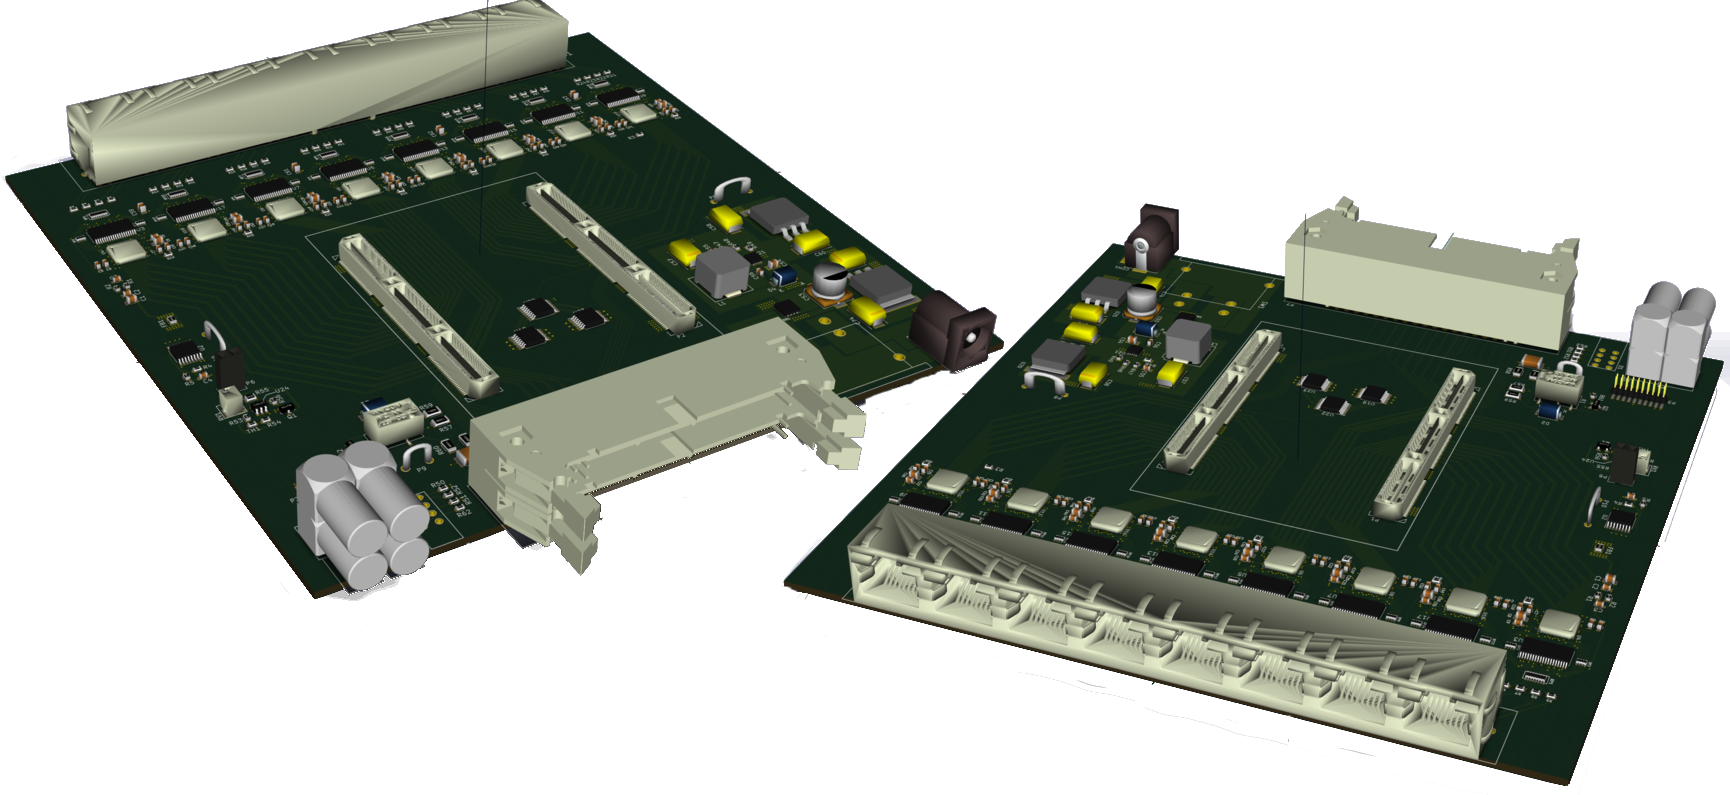 Front (left) and rear (right) 3D rendering of the Telescope DAQ. In the foreground of the front image are the LEMO connectors for supplying external clock and trigger as well as two programmable IO lines. The large center-front connector is a double 2x20 parallel port which is connected to matching connectors on the two backplane boards. Finally on the front right there is barrel jack for supplying power. The large connector in the foreground of the left image is an 8xRJ-45 jack for receiving the differential analog signals from the APC128 chips.